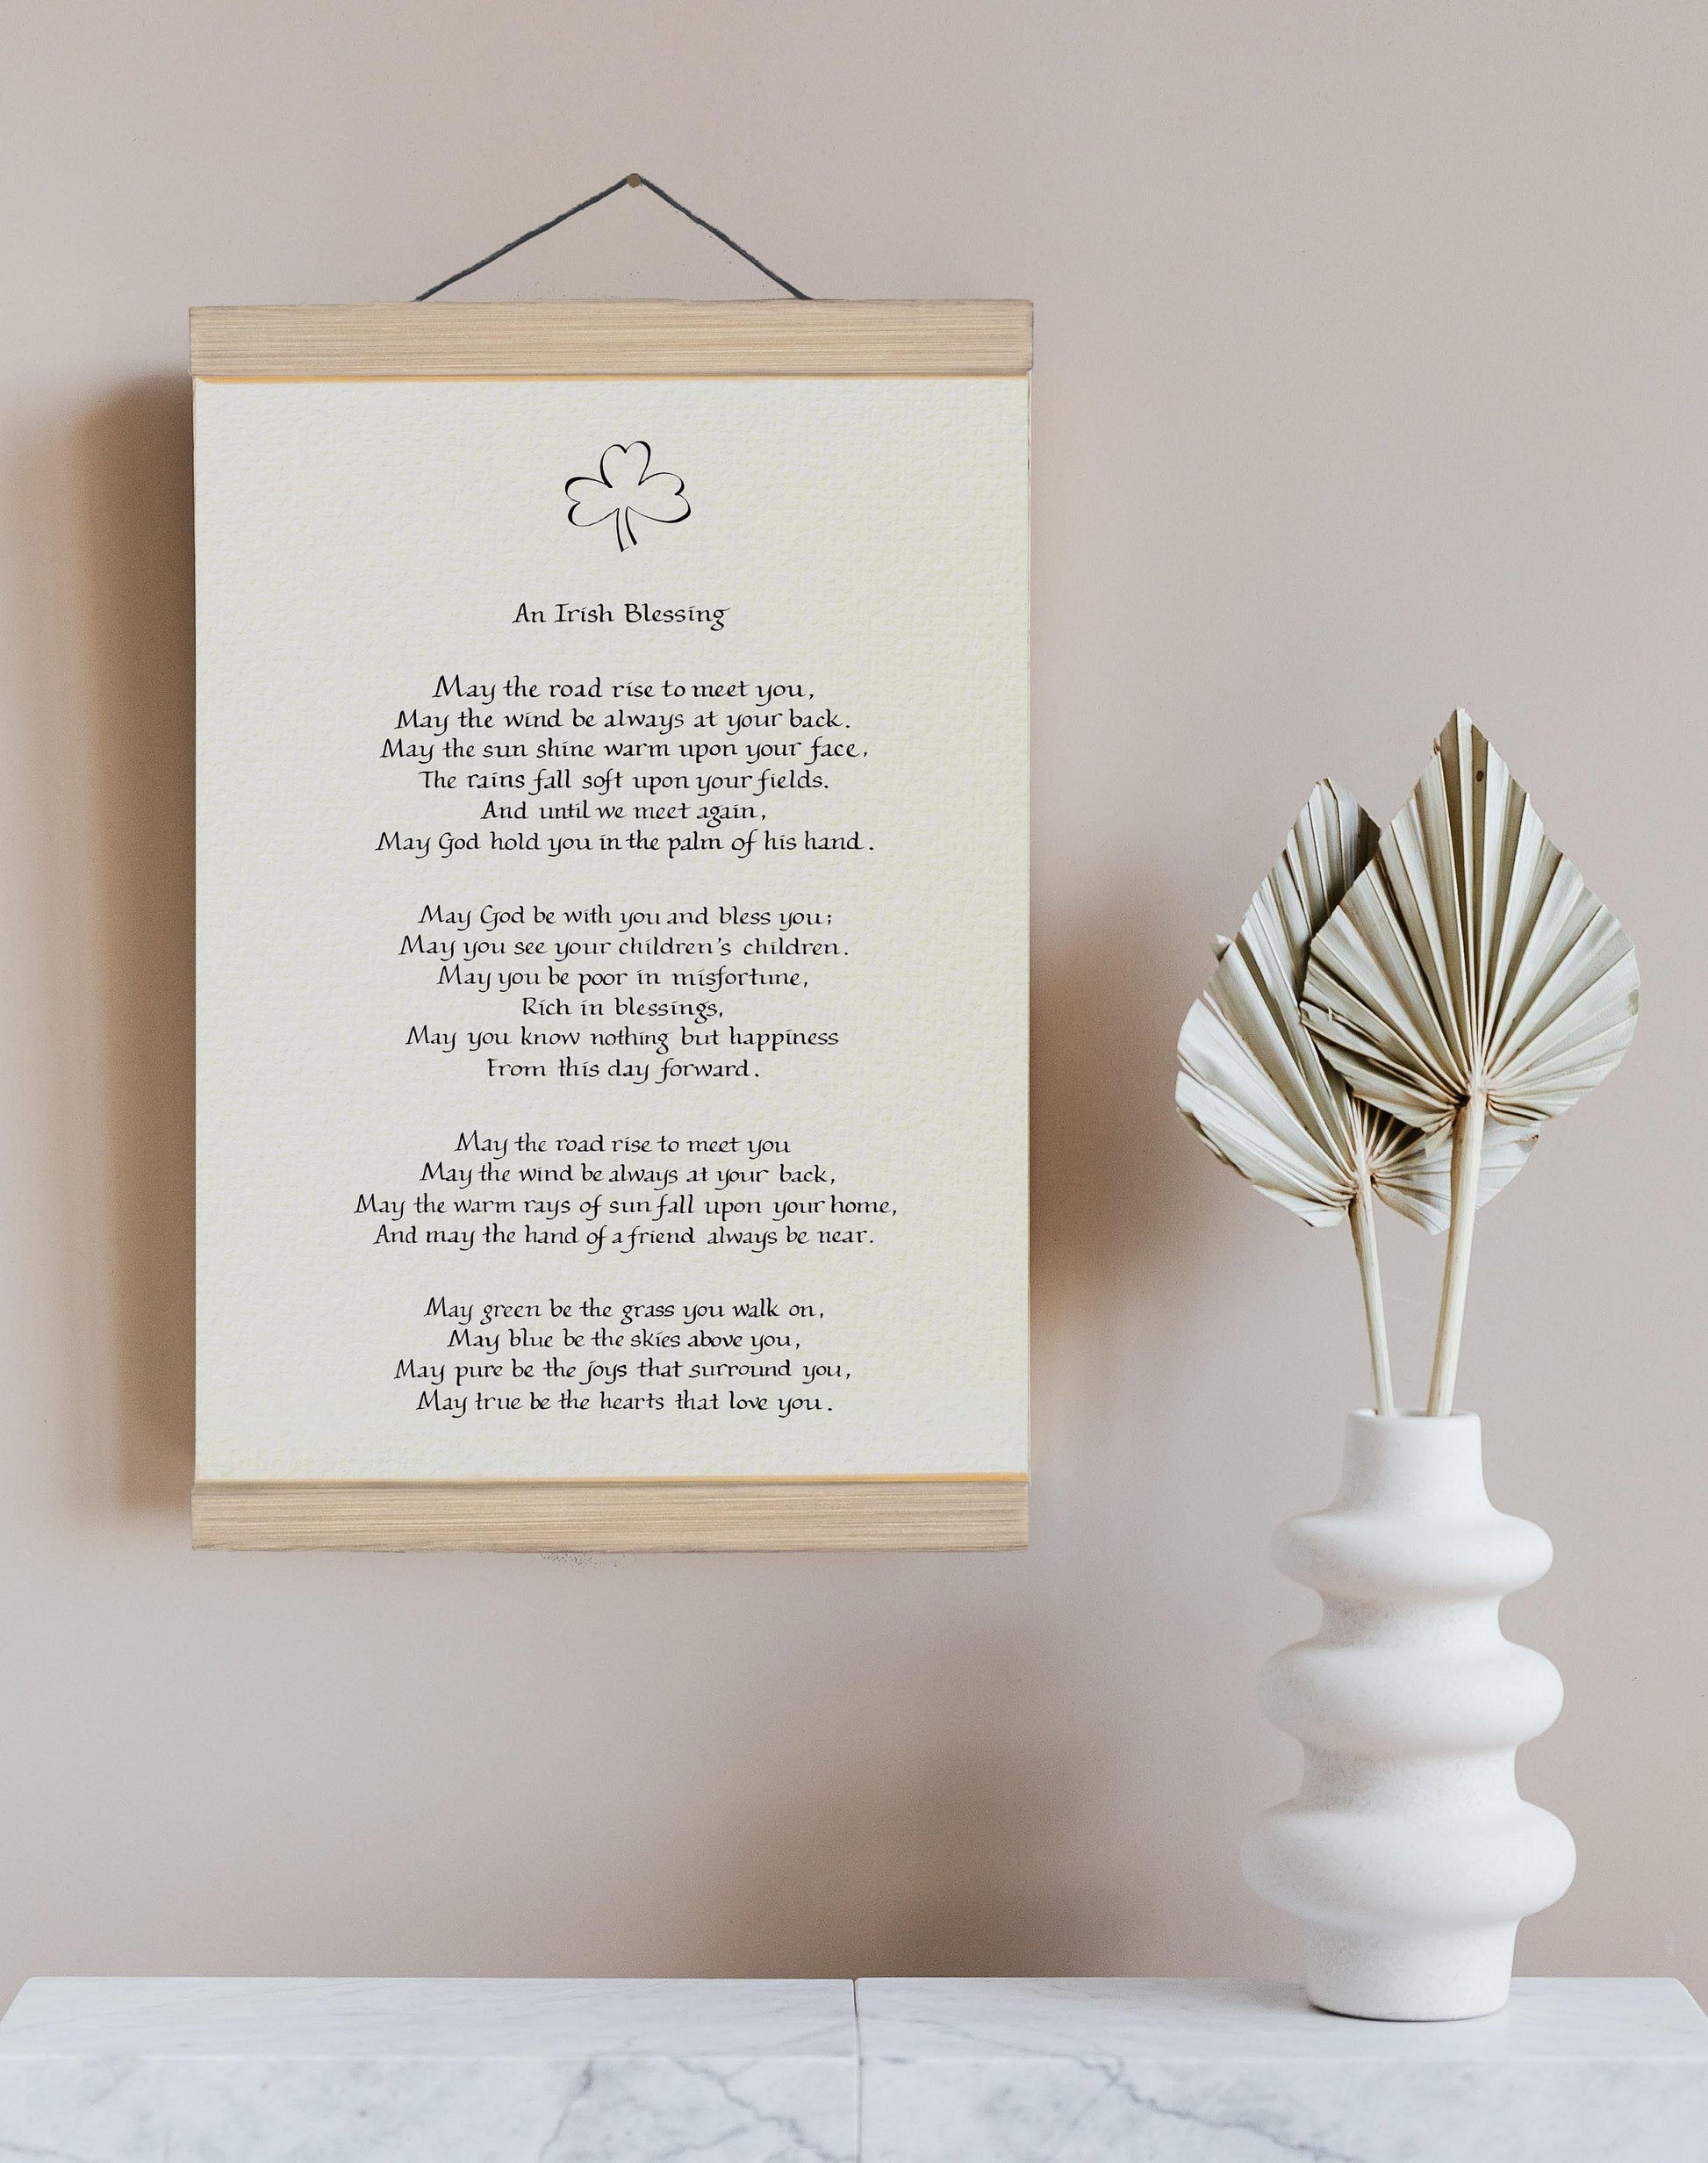 An Irish Blessing Print Framed - Calligraphy Print - Traditional Irish Gift for the Home - Framed Poster - Irish Blessing poem